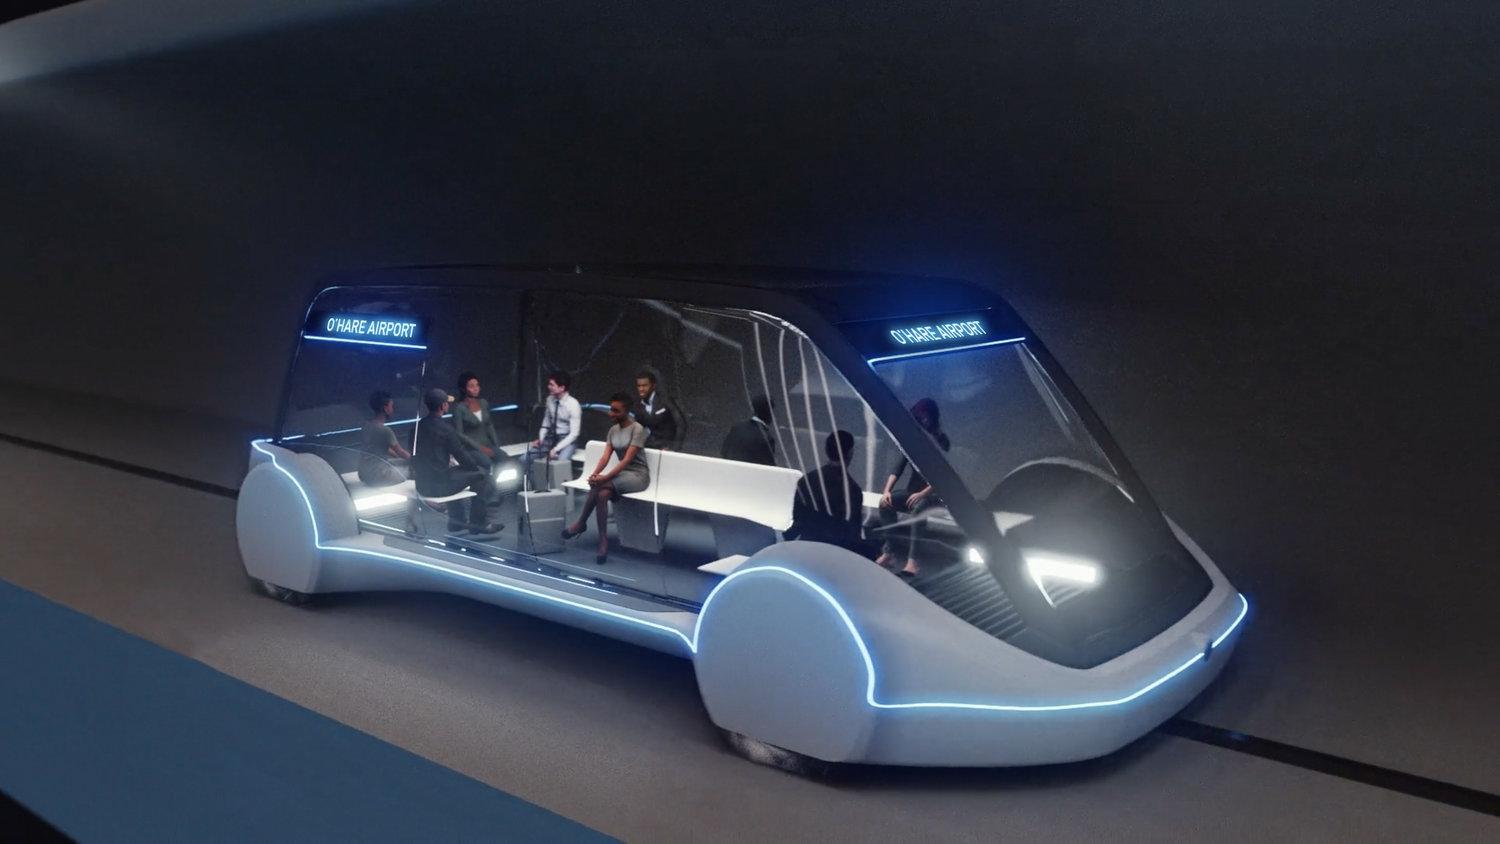 Each pod would hold 8-16 people. (Credit: The Boring Company)